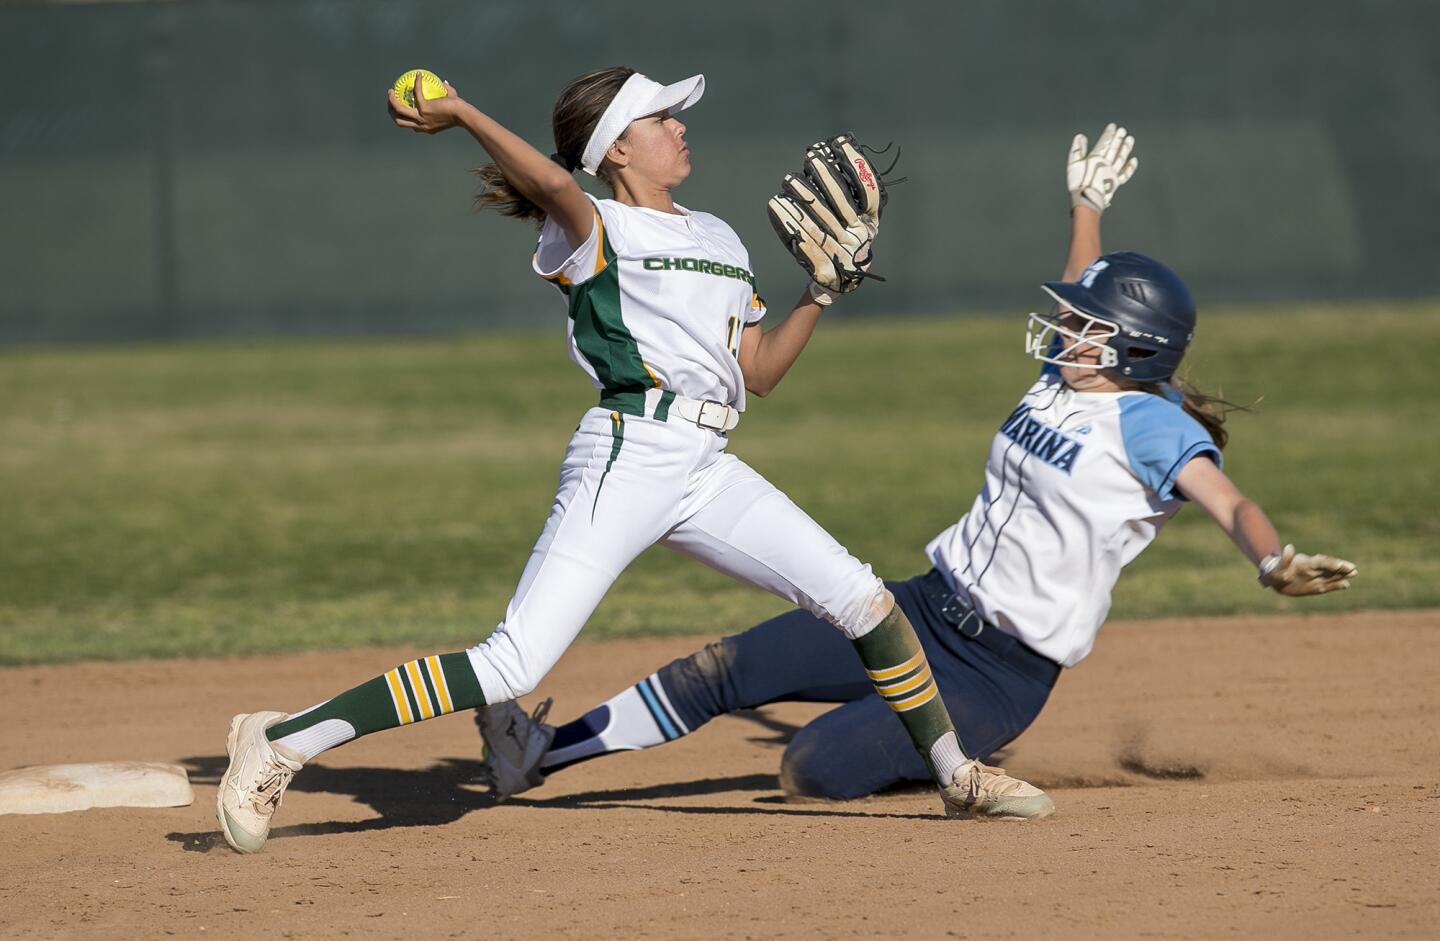 Edison's Bella Espinoza gets the force Marina's Ashley Pilatos and attempts to turn the double in the seventh inning during a Sunset League game on Thursday, March 29.